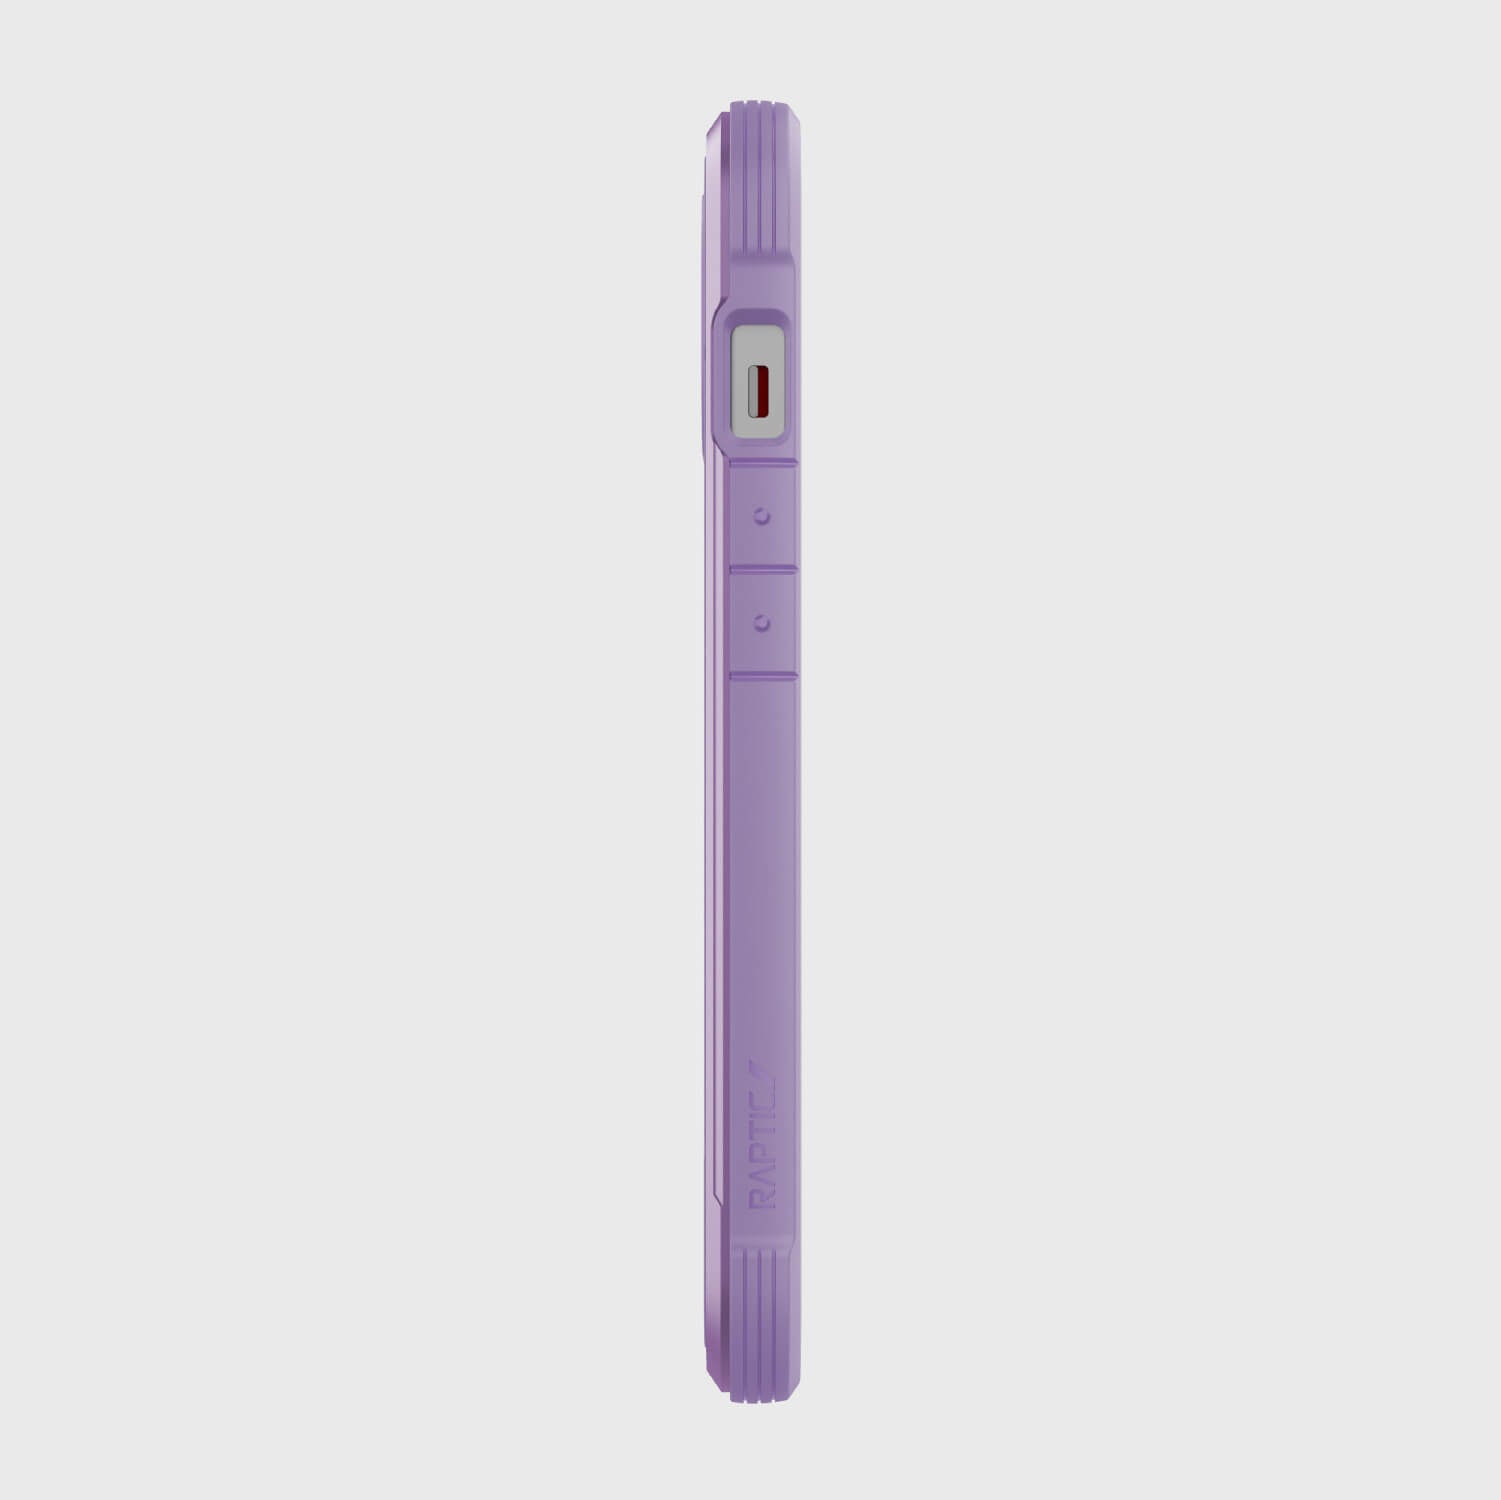 A Raptic iPhone 13 Case - SHIELD PRO purple phone case with drop protection on a white background.